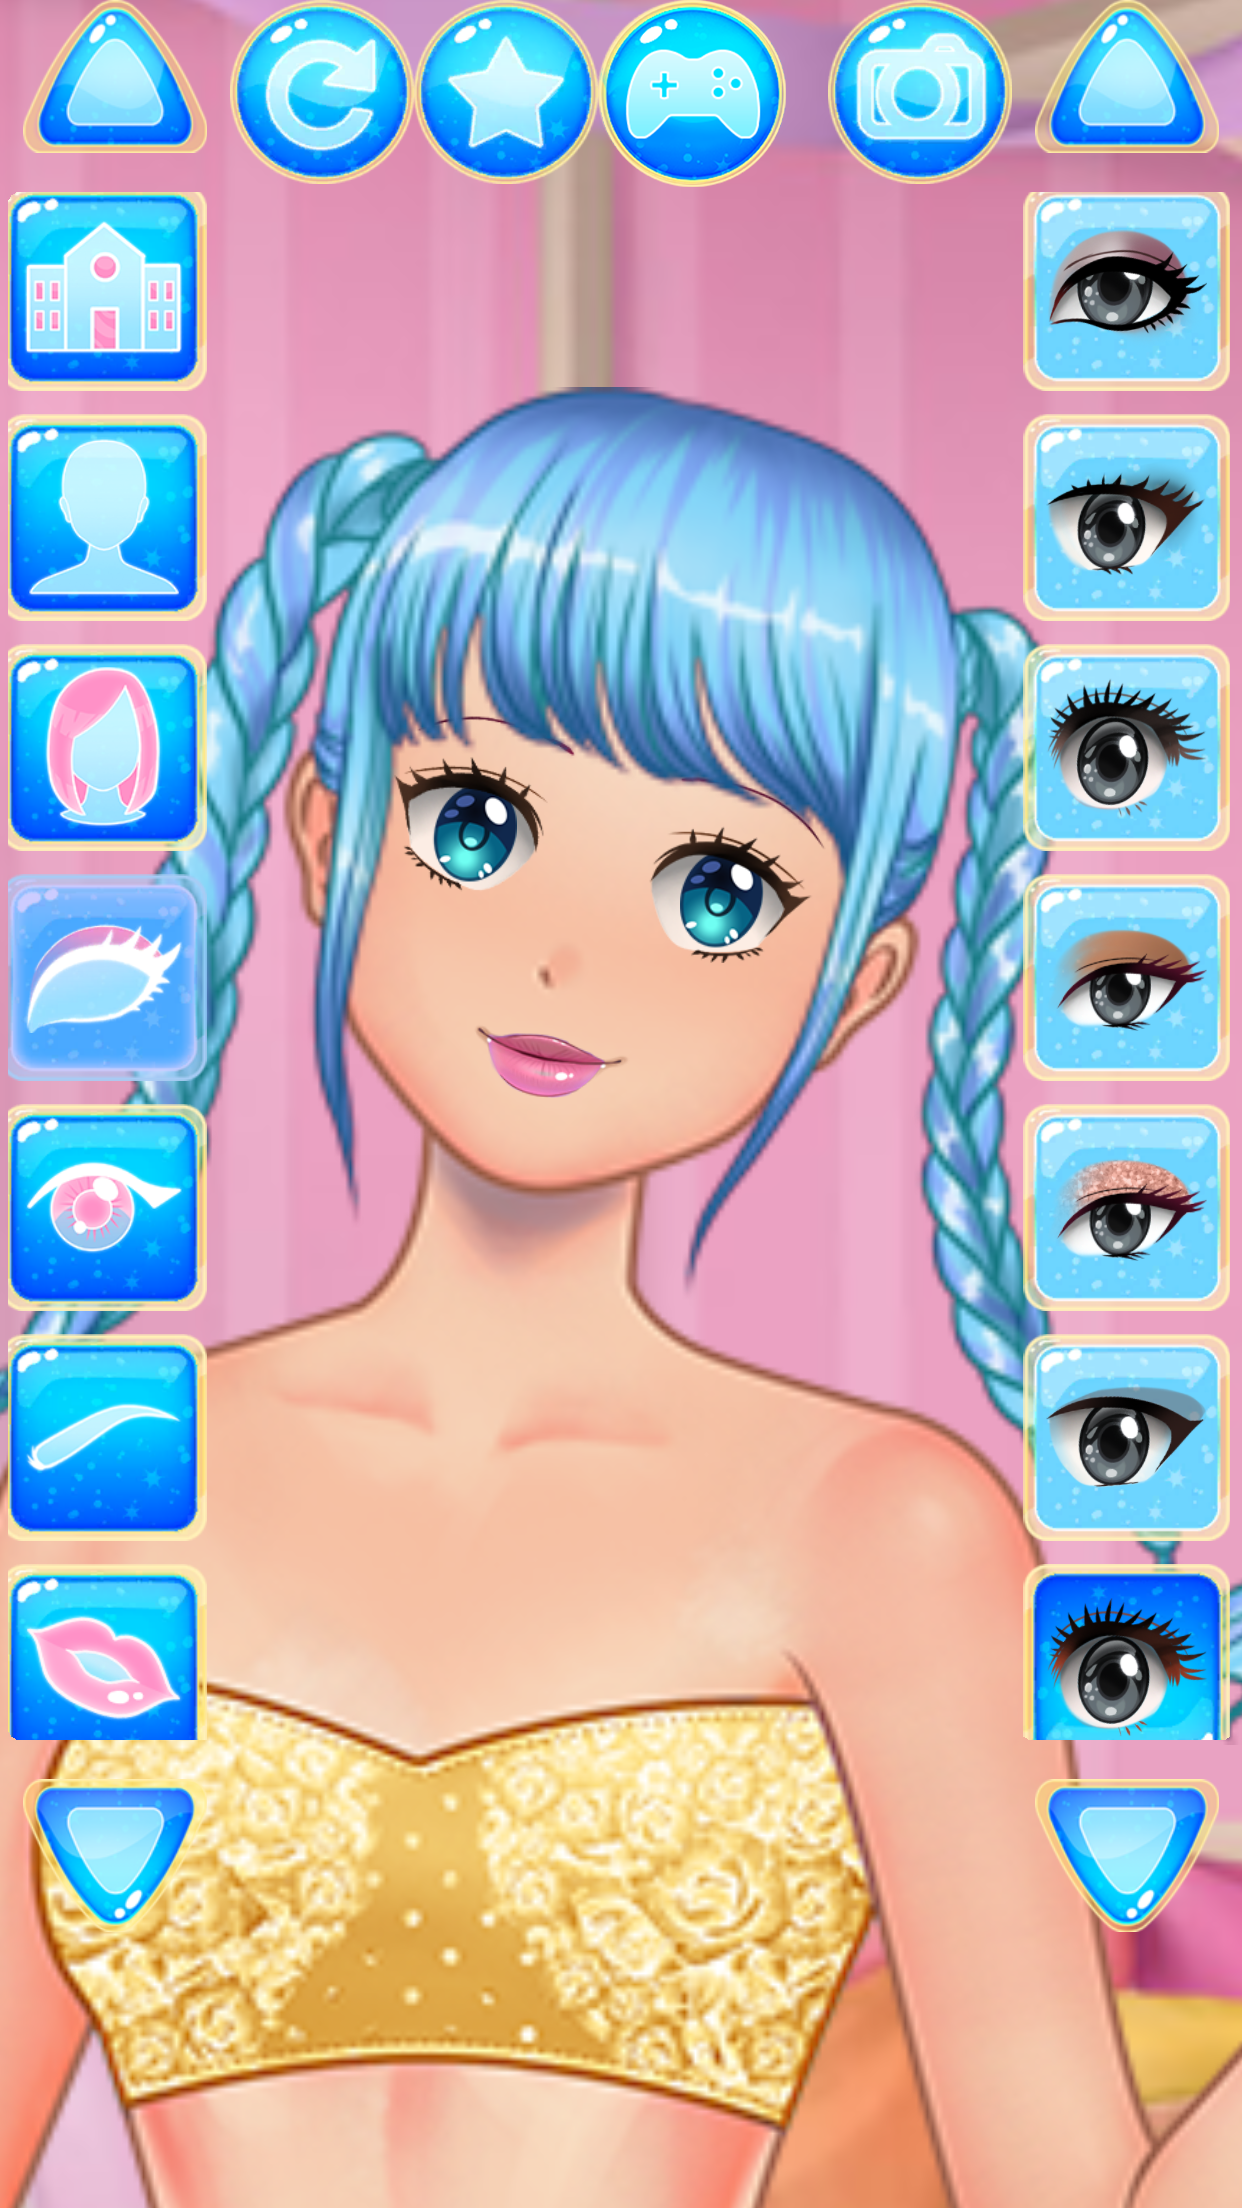 Anime Kawaii Dress Up — play online for free on Yandex Games